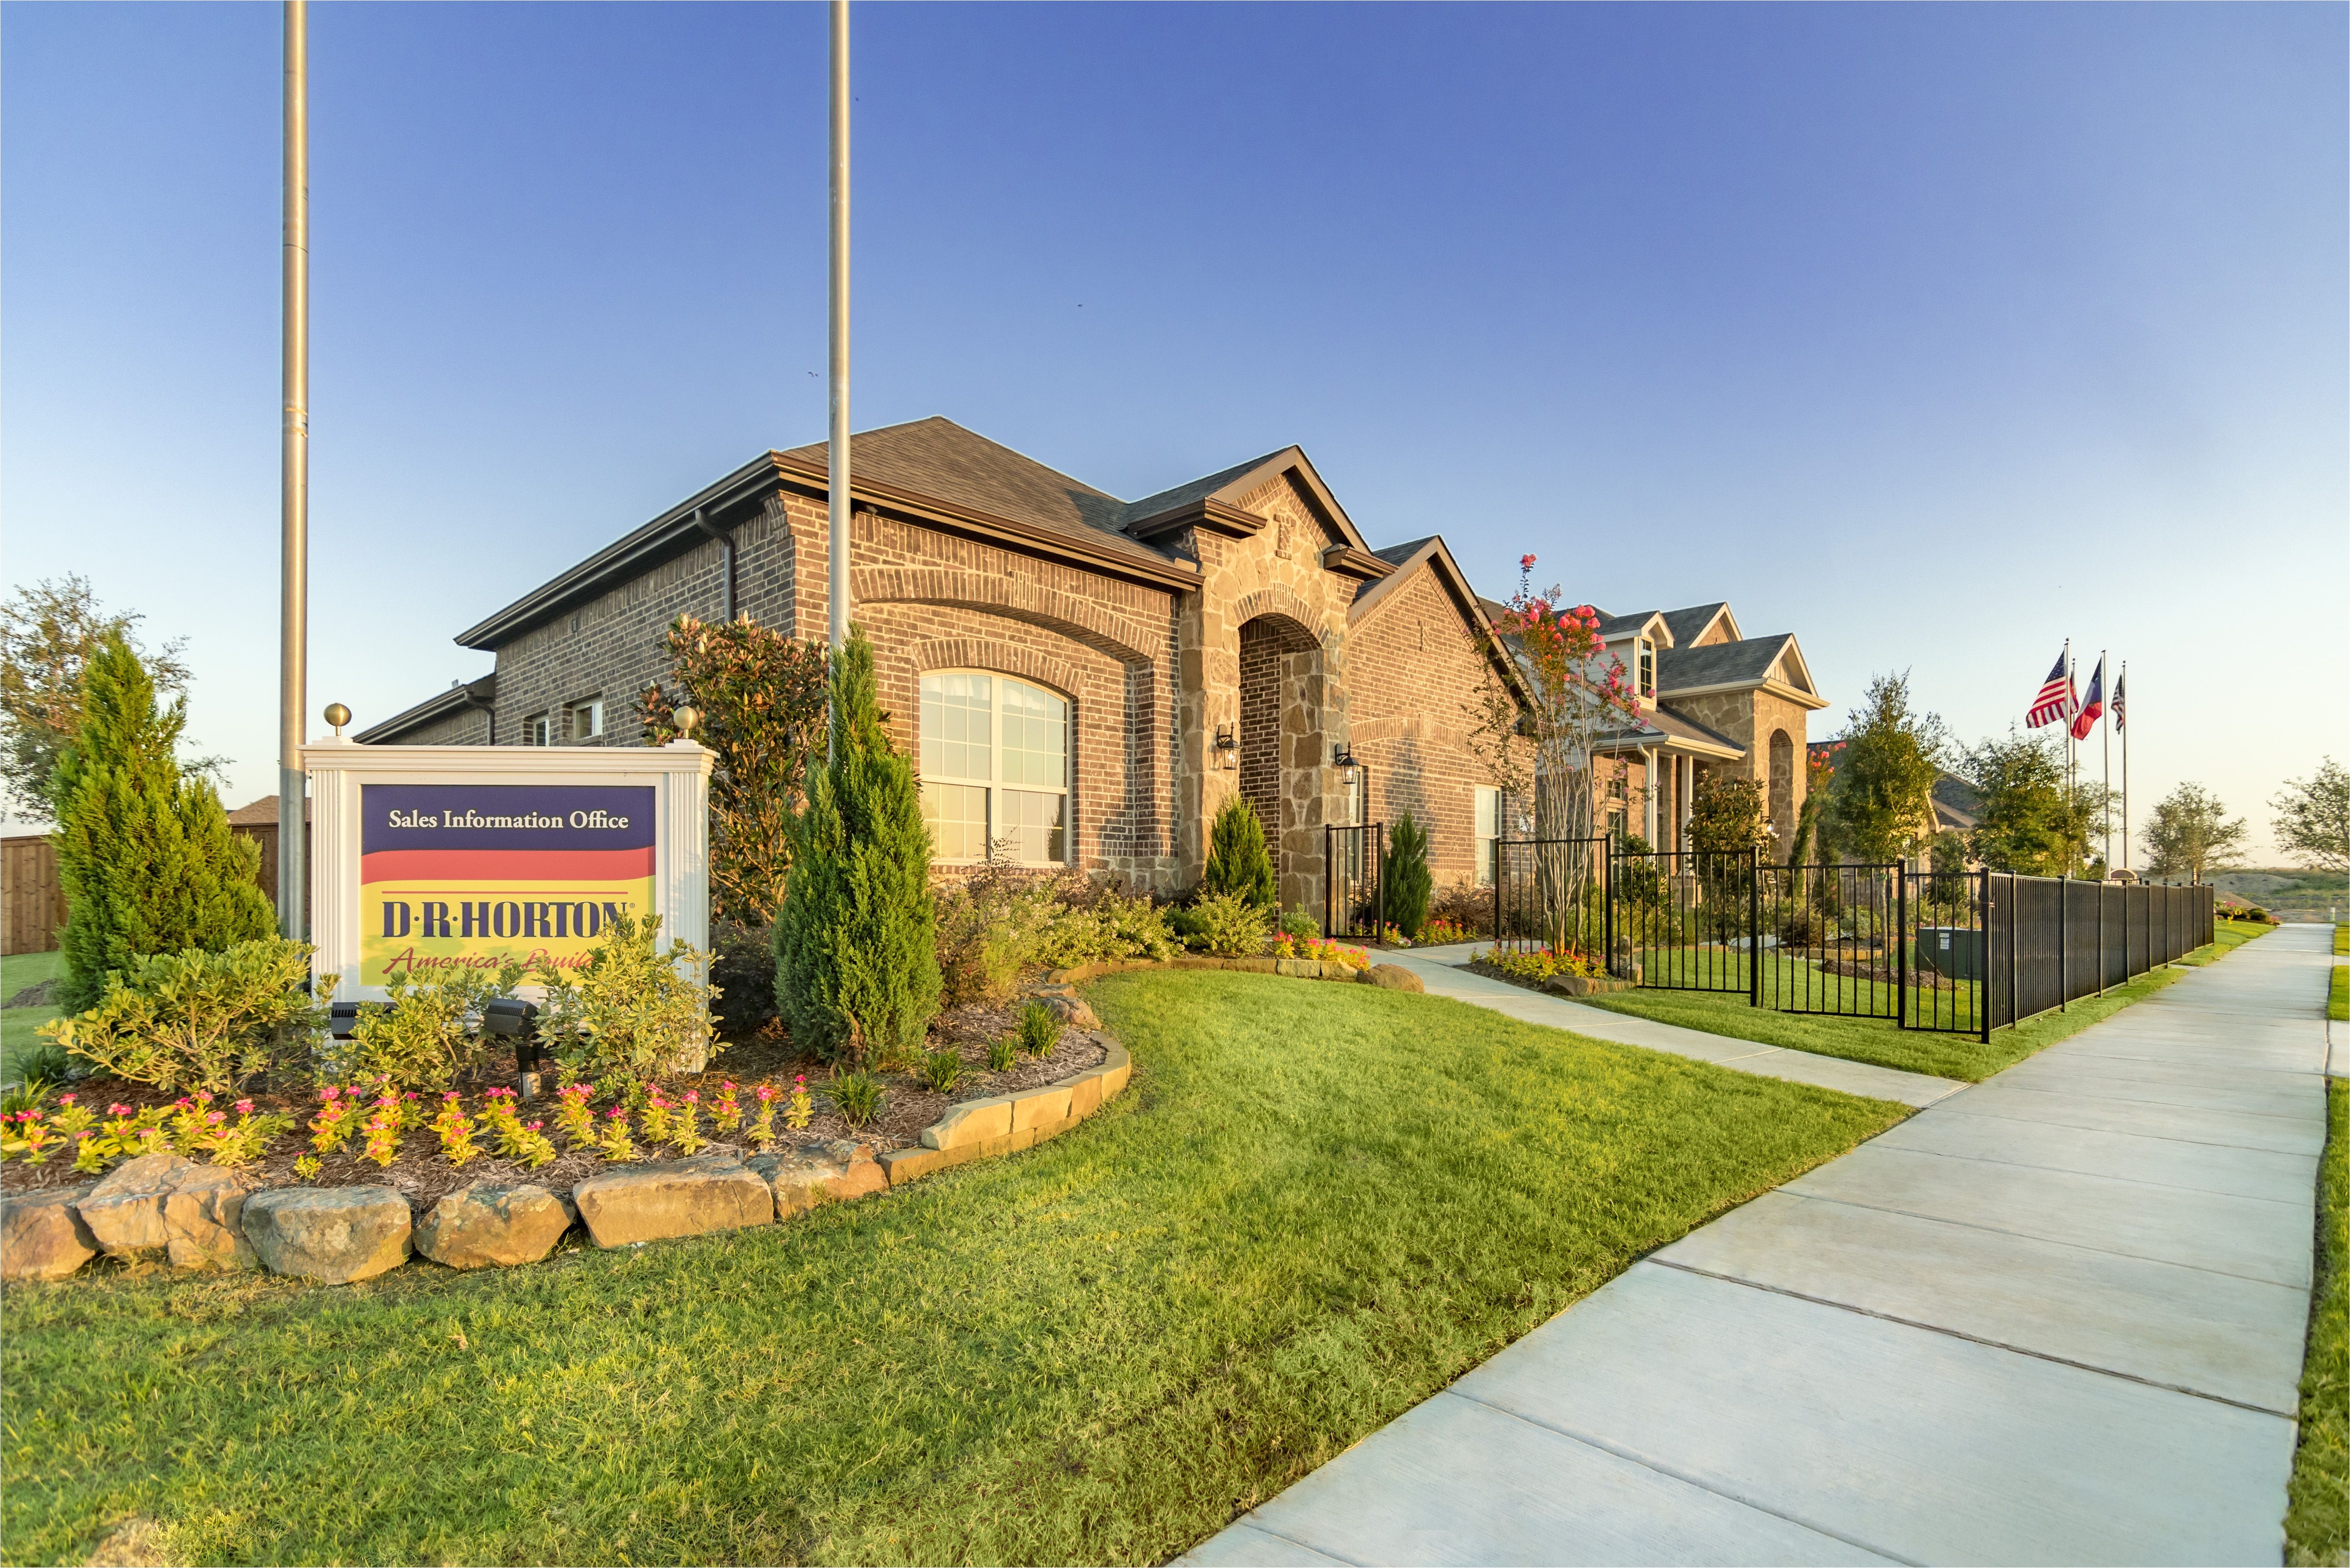 dr horton homes model home at clements ranch in forney tx